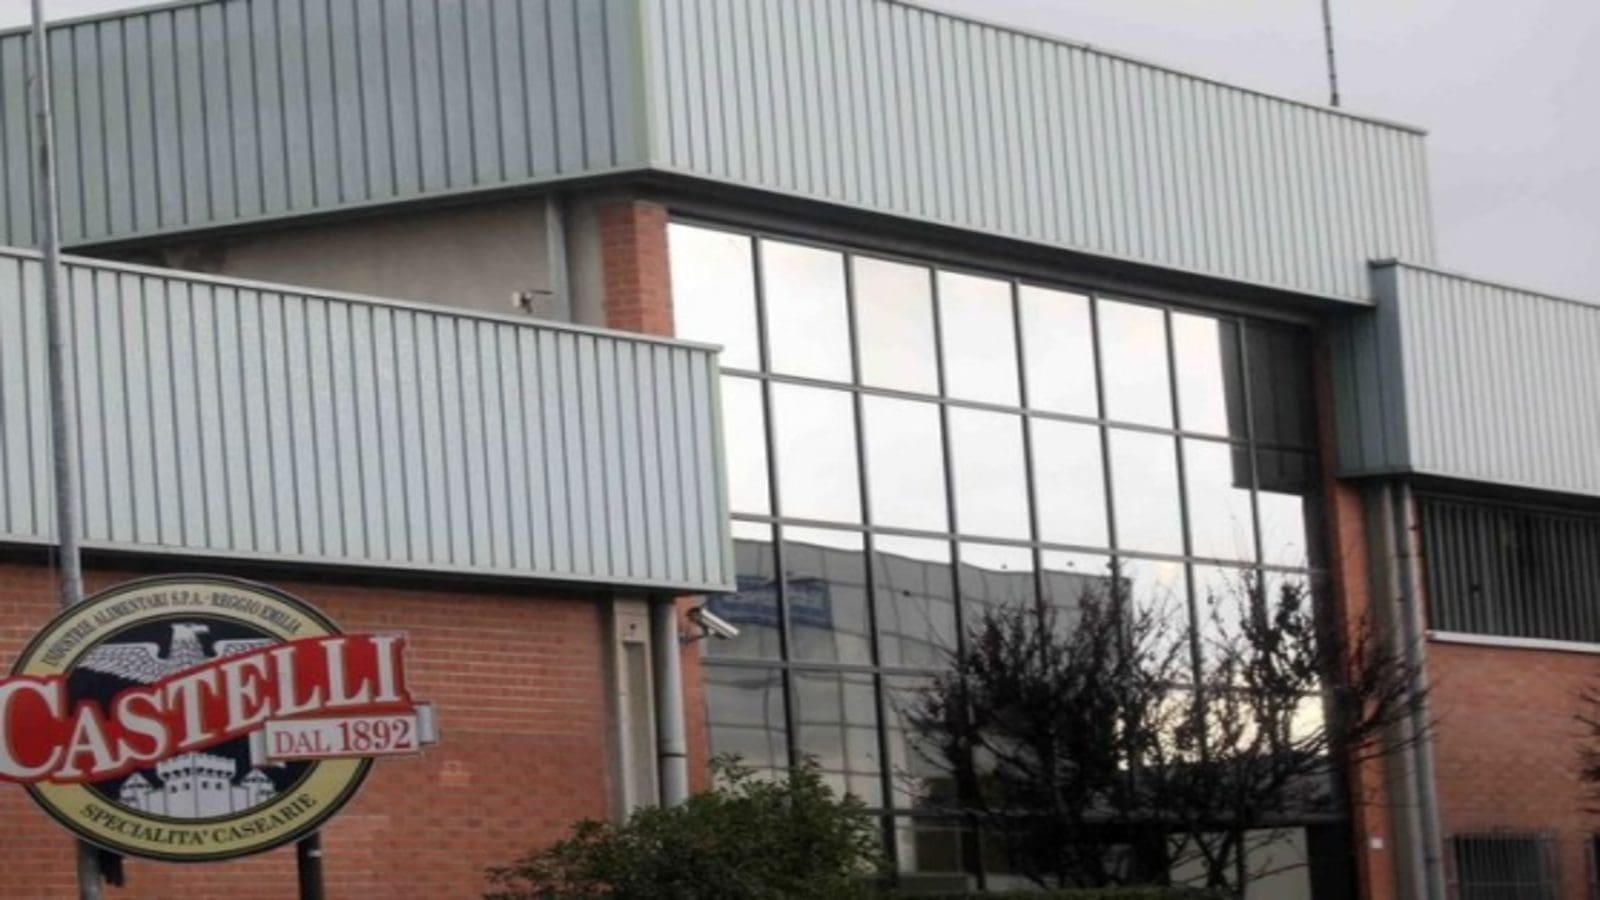 Lactalis-owned Nuova Castelli plans to close 2 factories